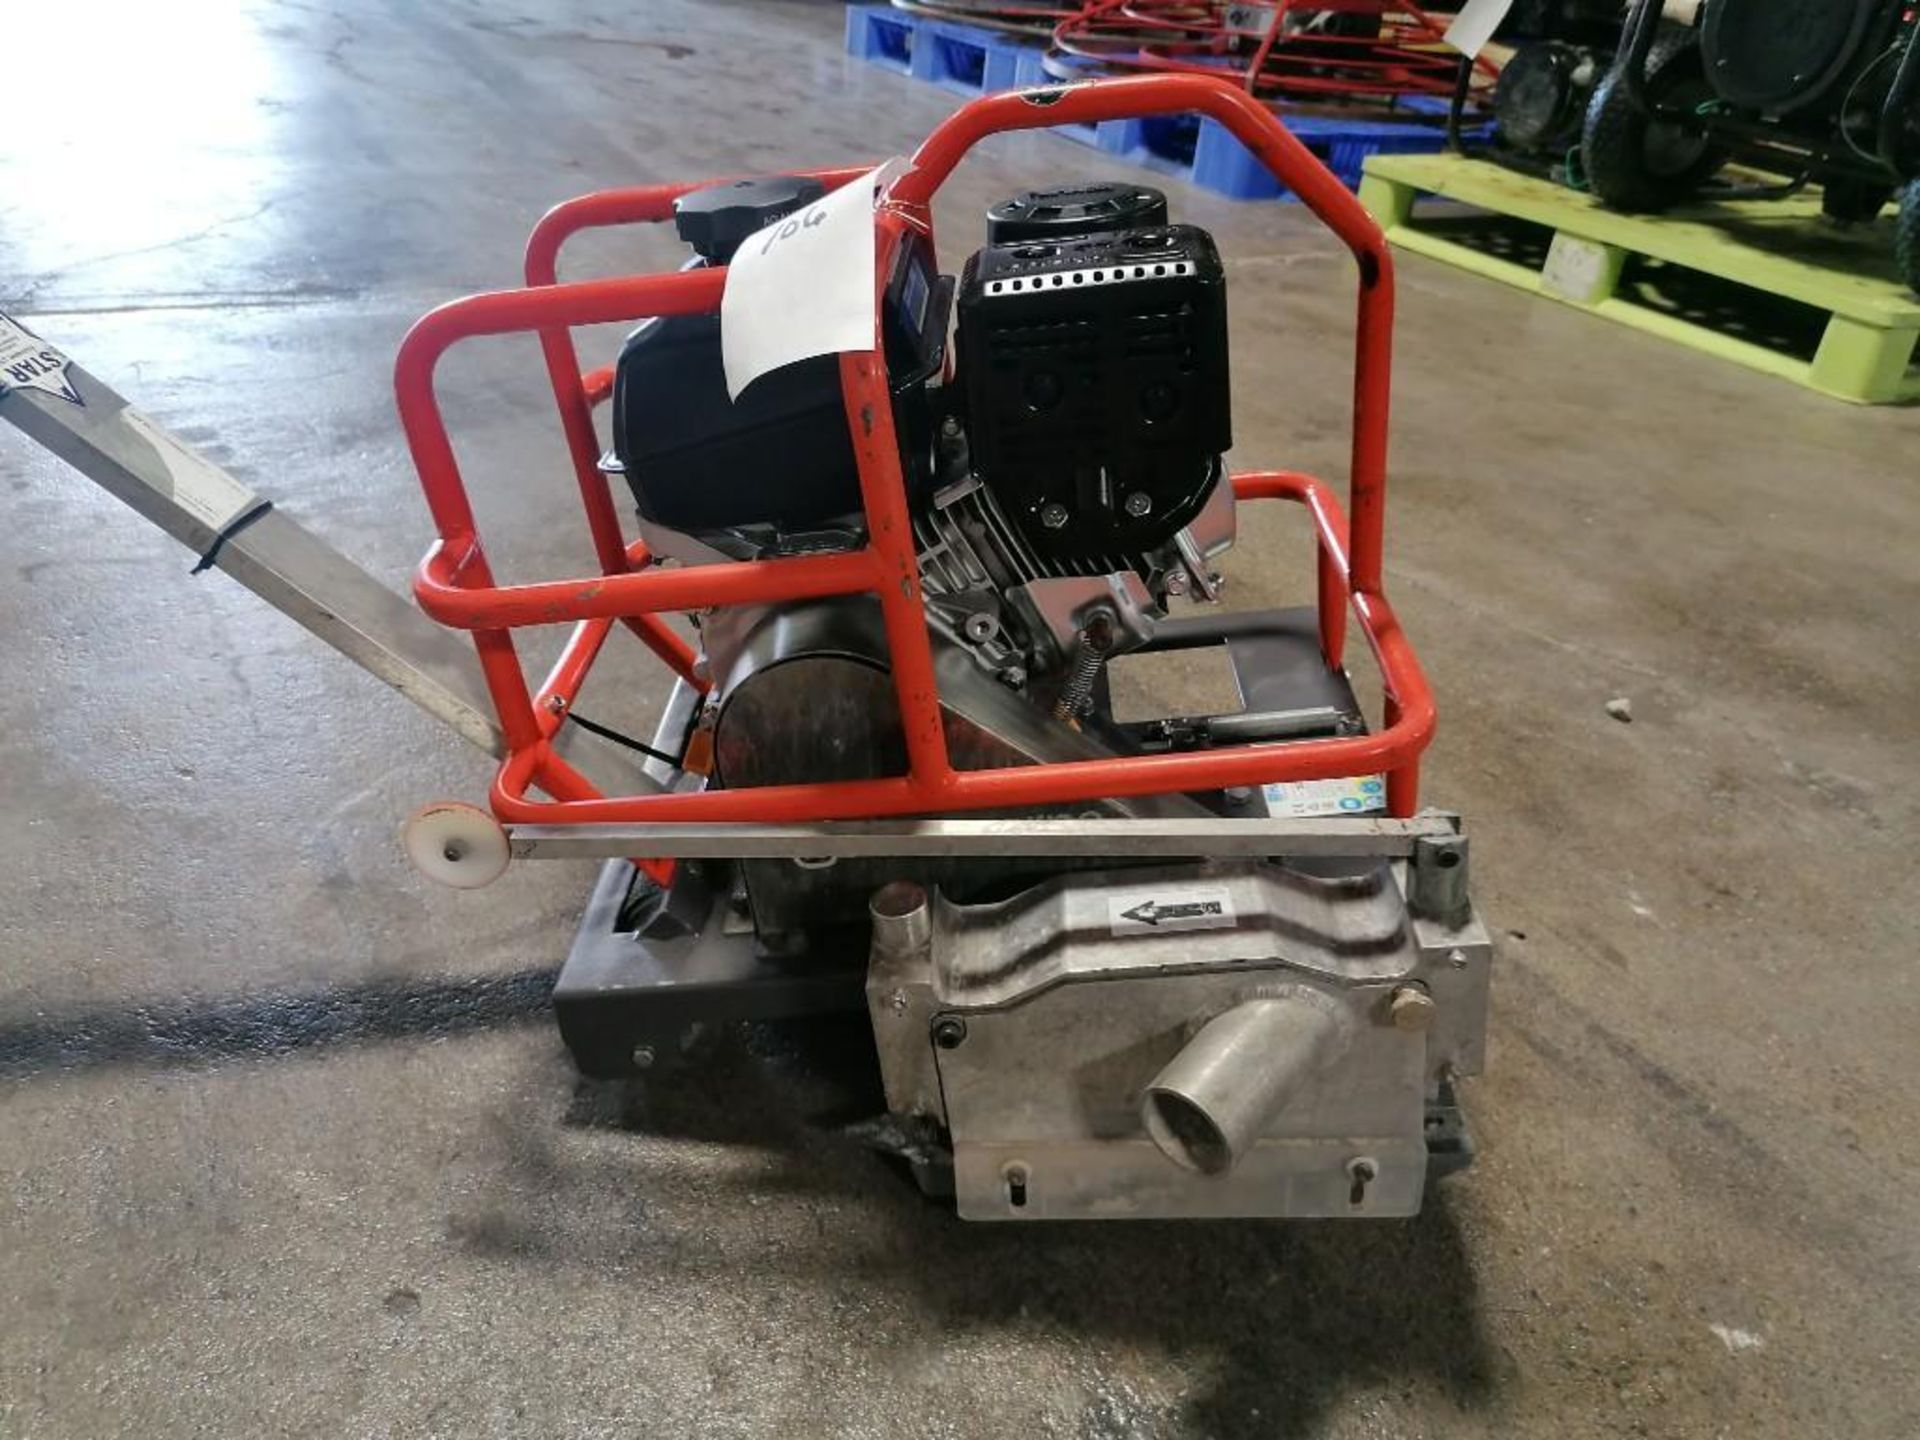 Husqvarna Soff-Cut 150 Concrete Saw. Serial #20180400053. Located at 301 E Henry Street, Mt. - Image 4 of 4